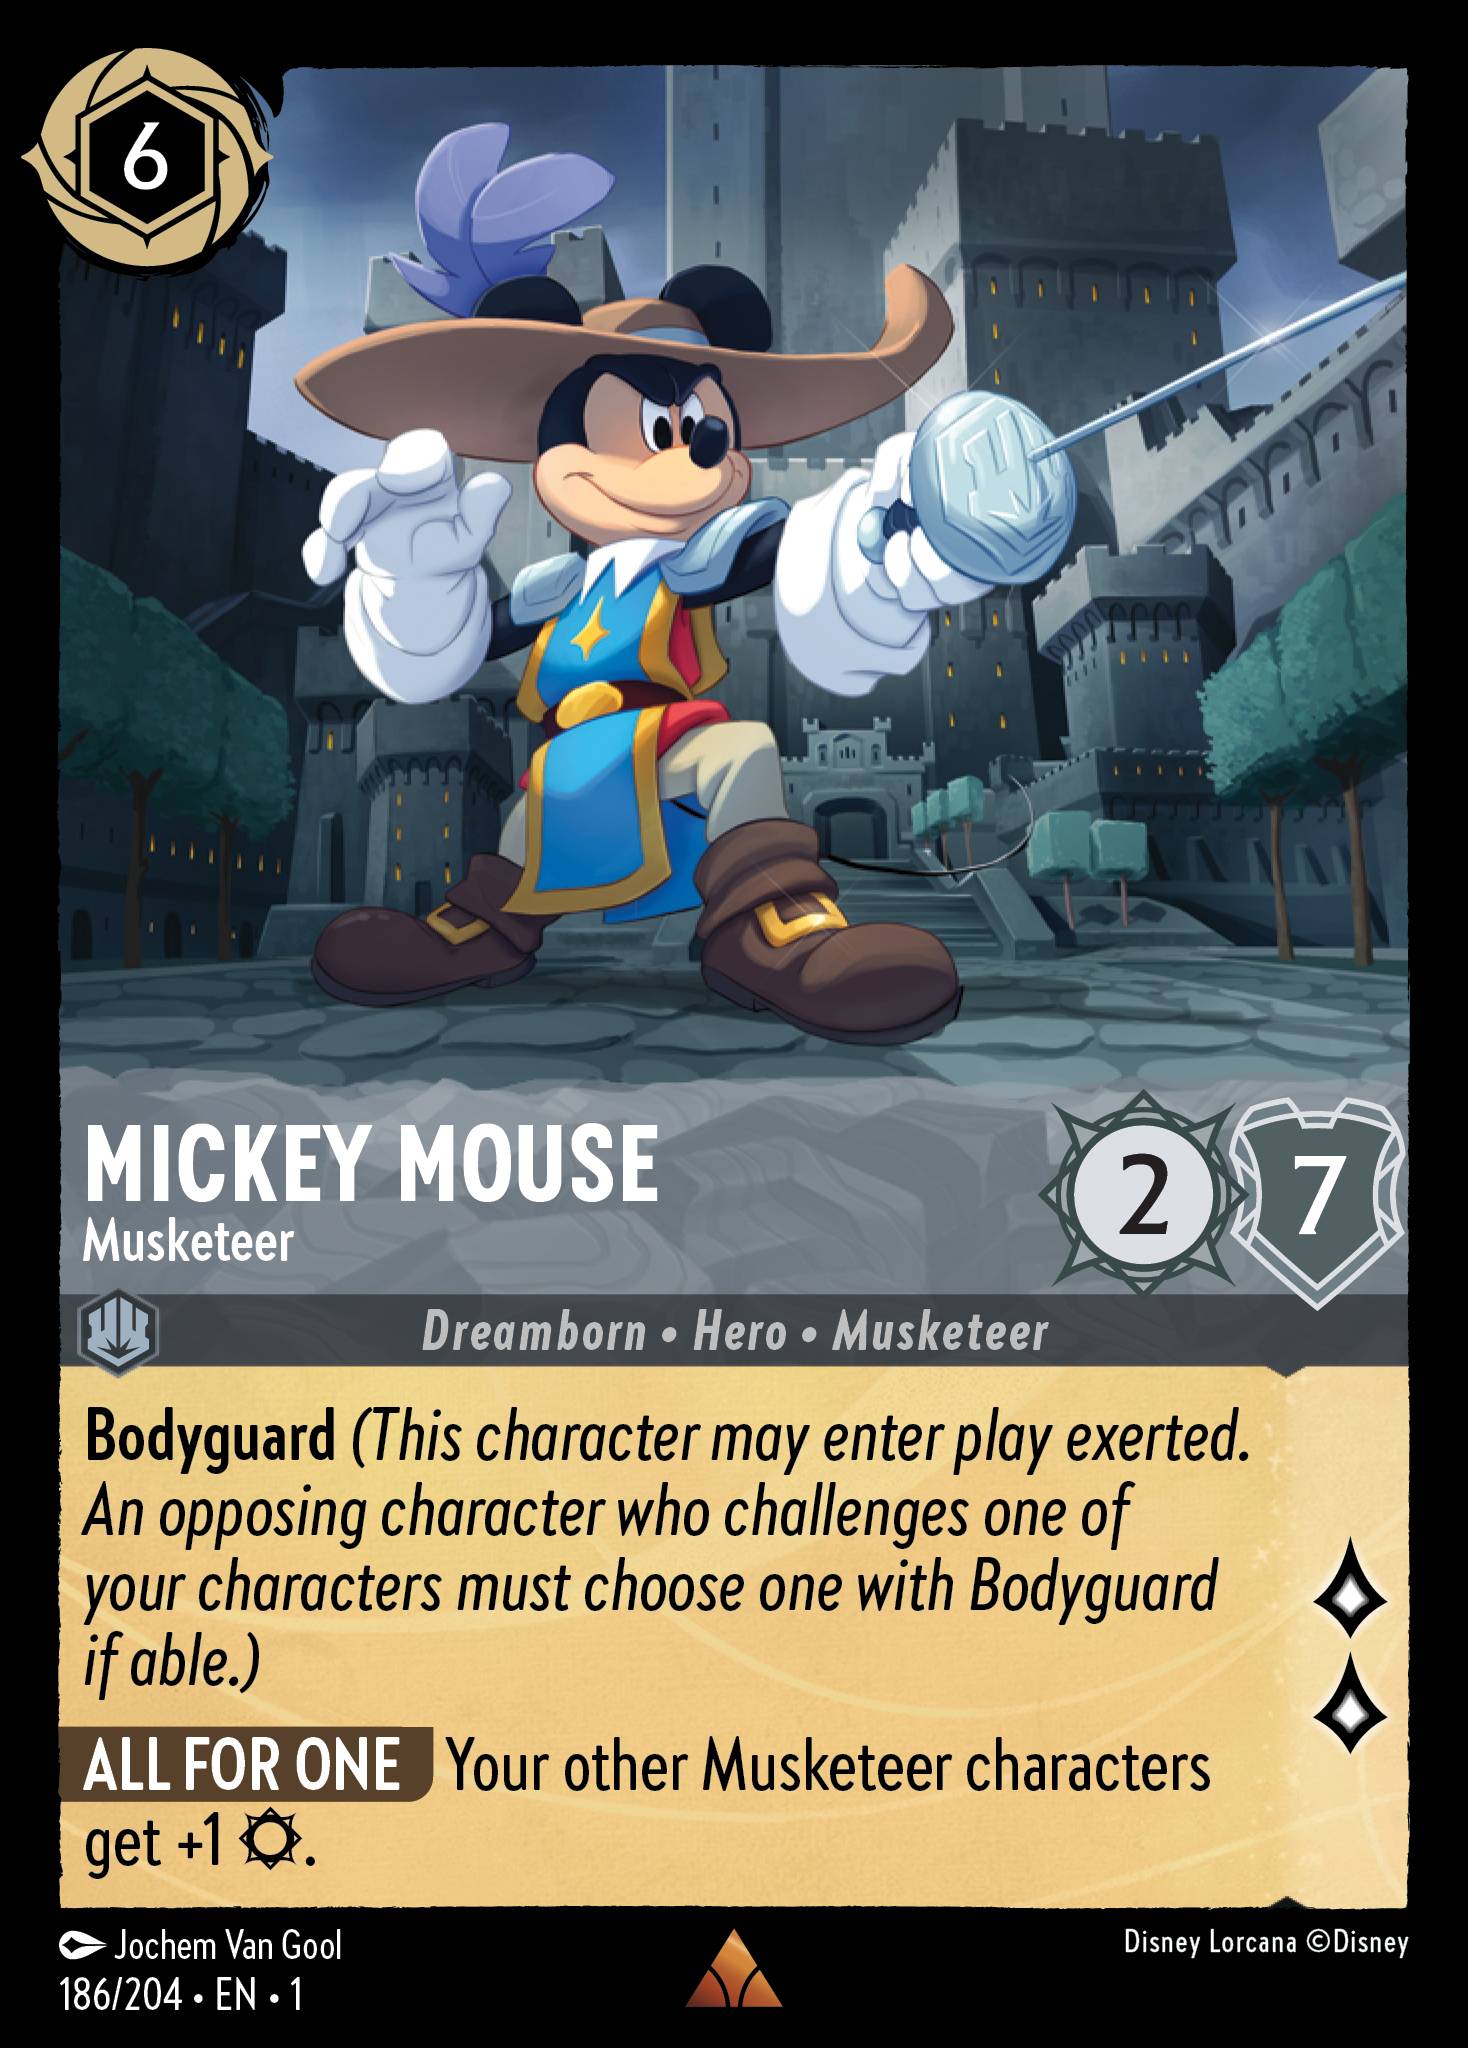 MICKEY MOUSE - Musketeer